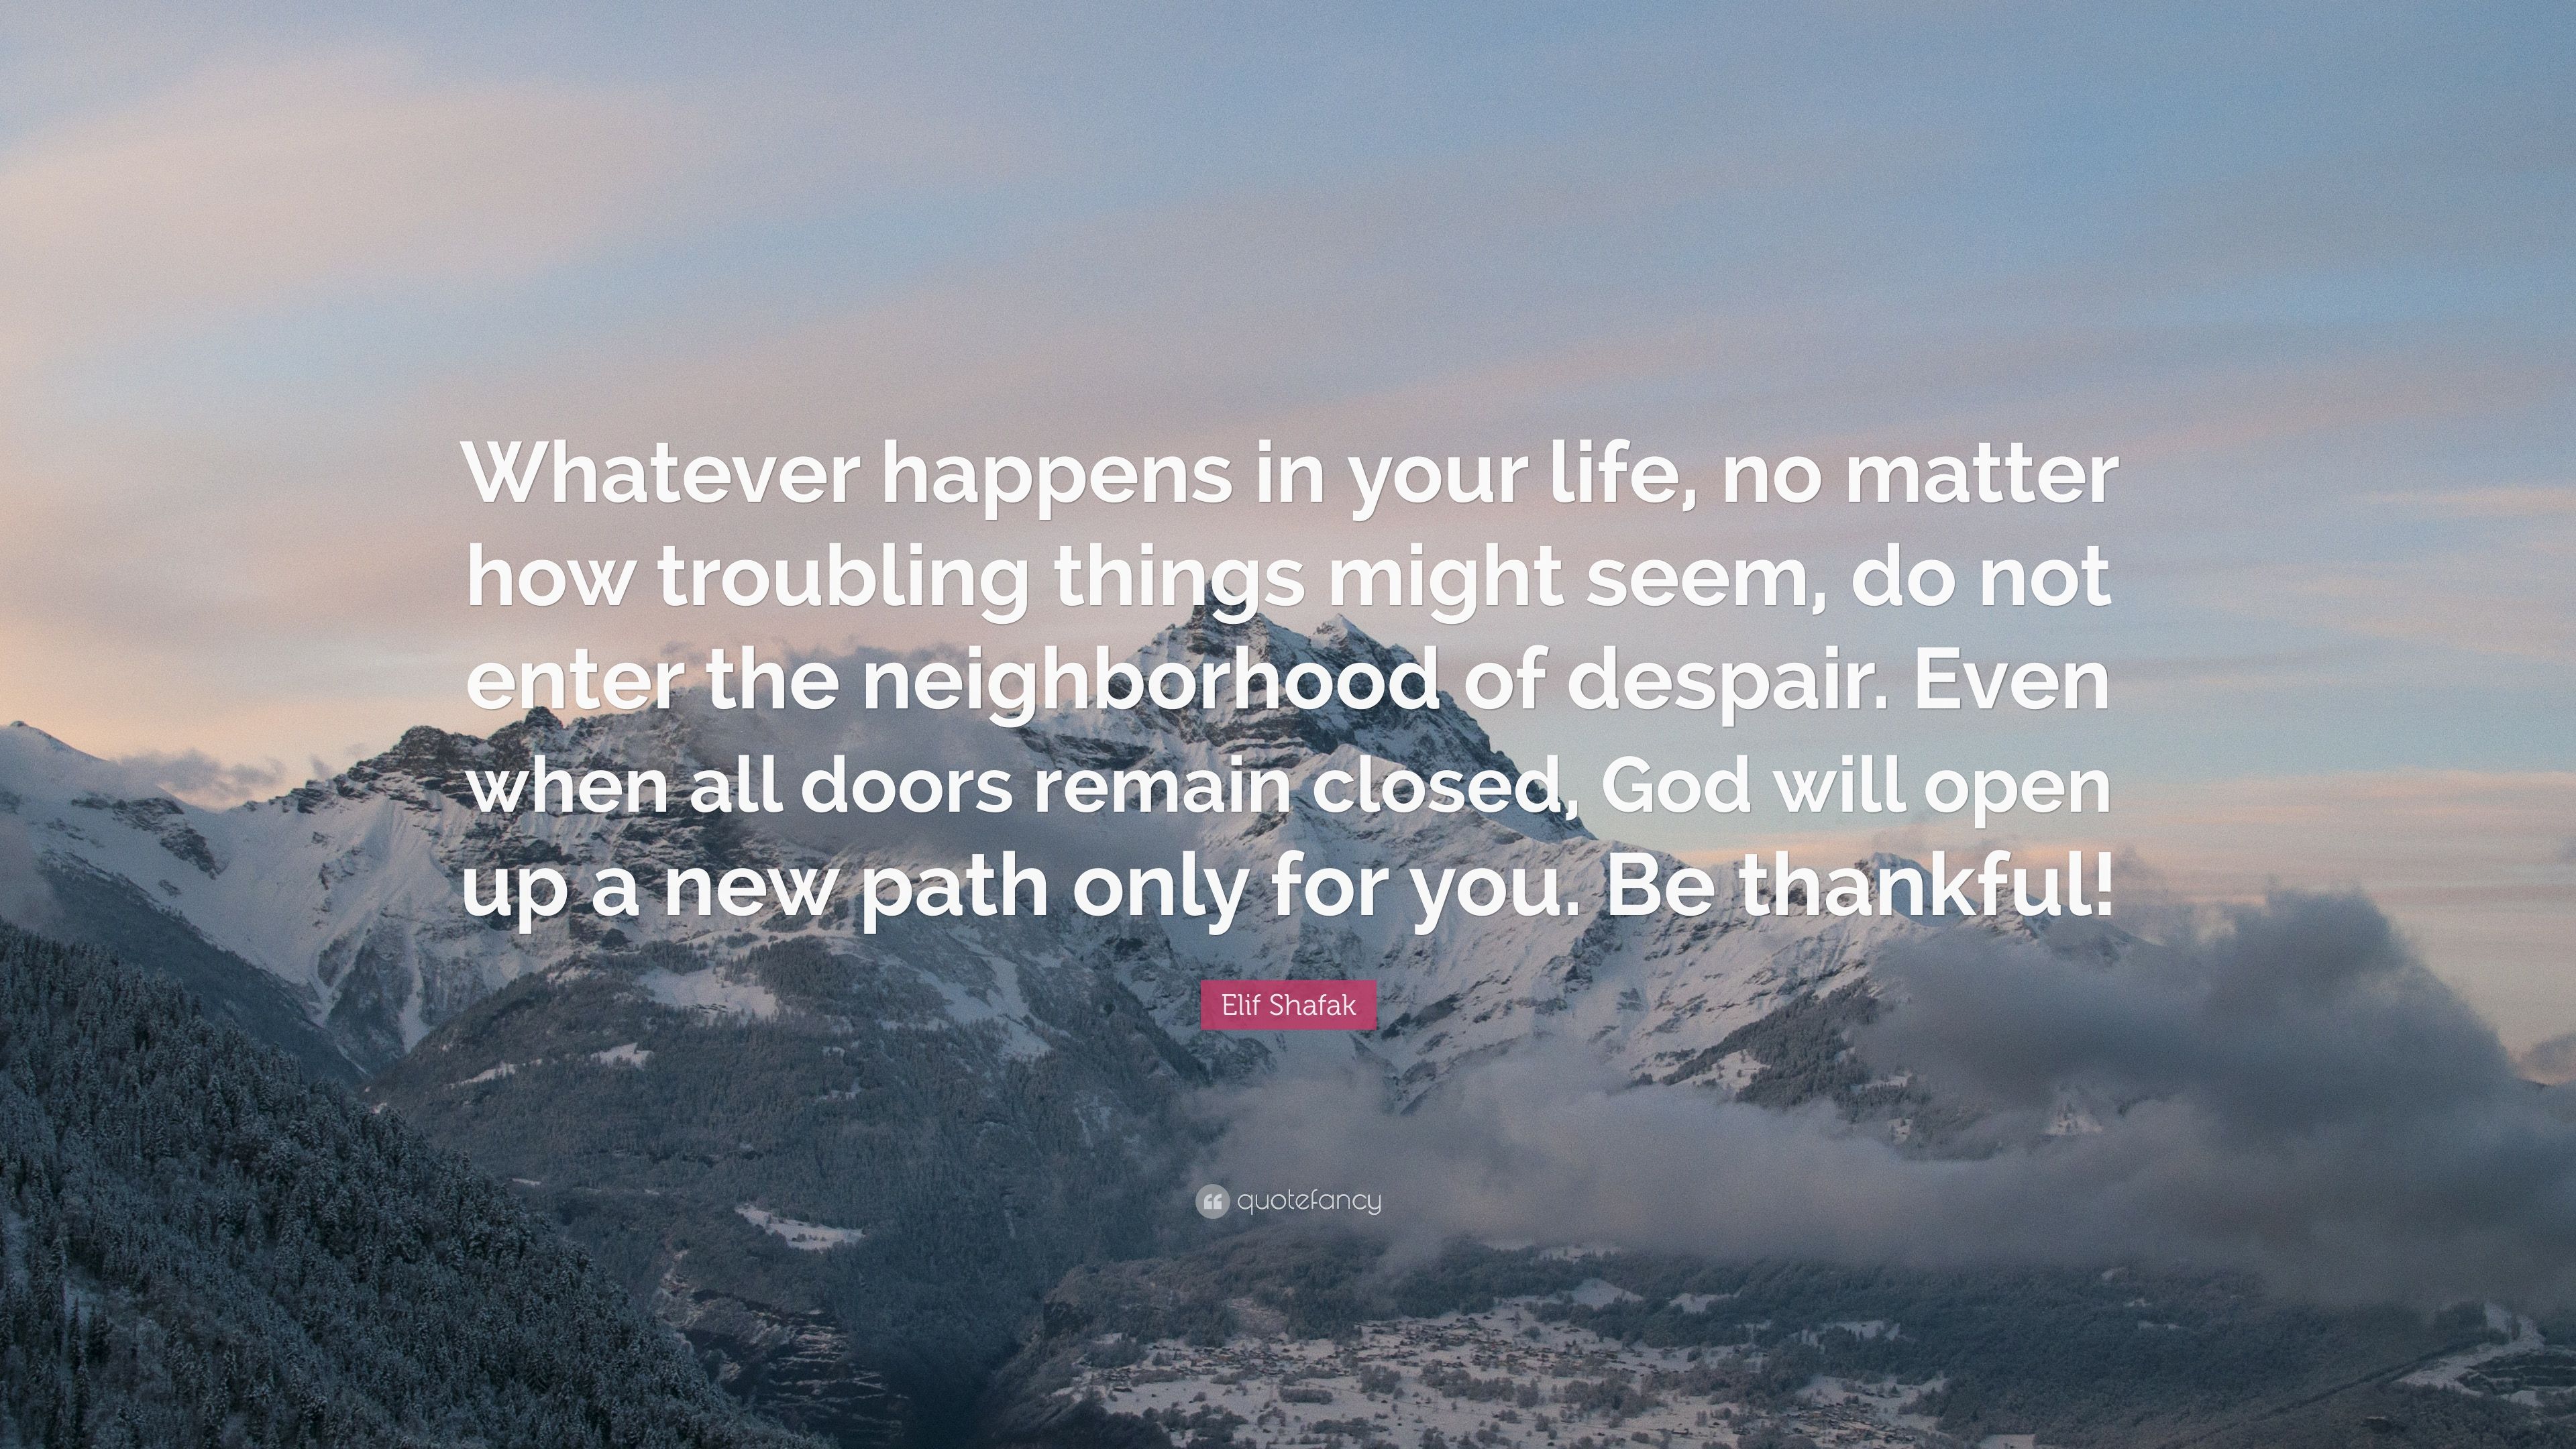 Elif Shafak Quote: “Whatever happens in your life, no matter how